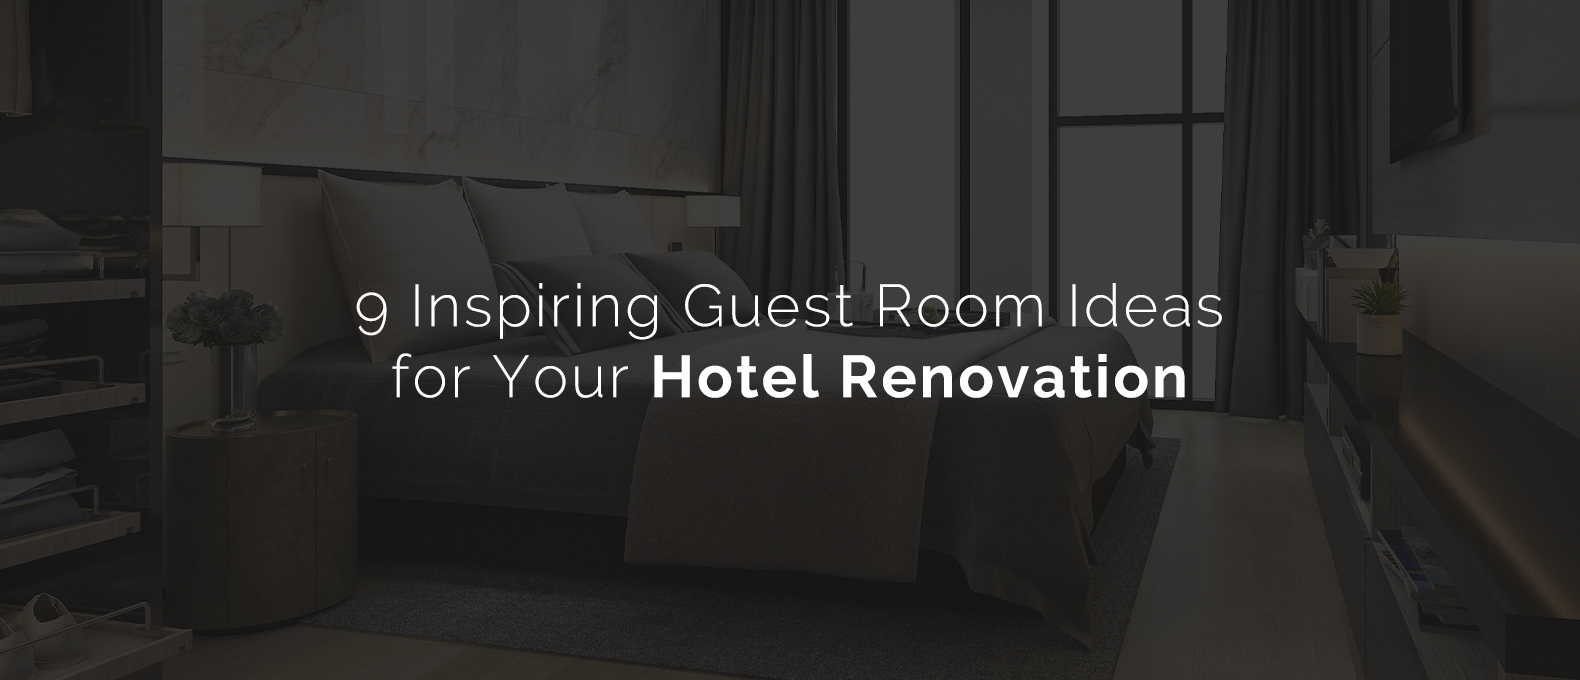 9 Inspiring Guest Room Ideas for your Hotel Renovation